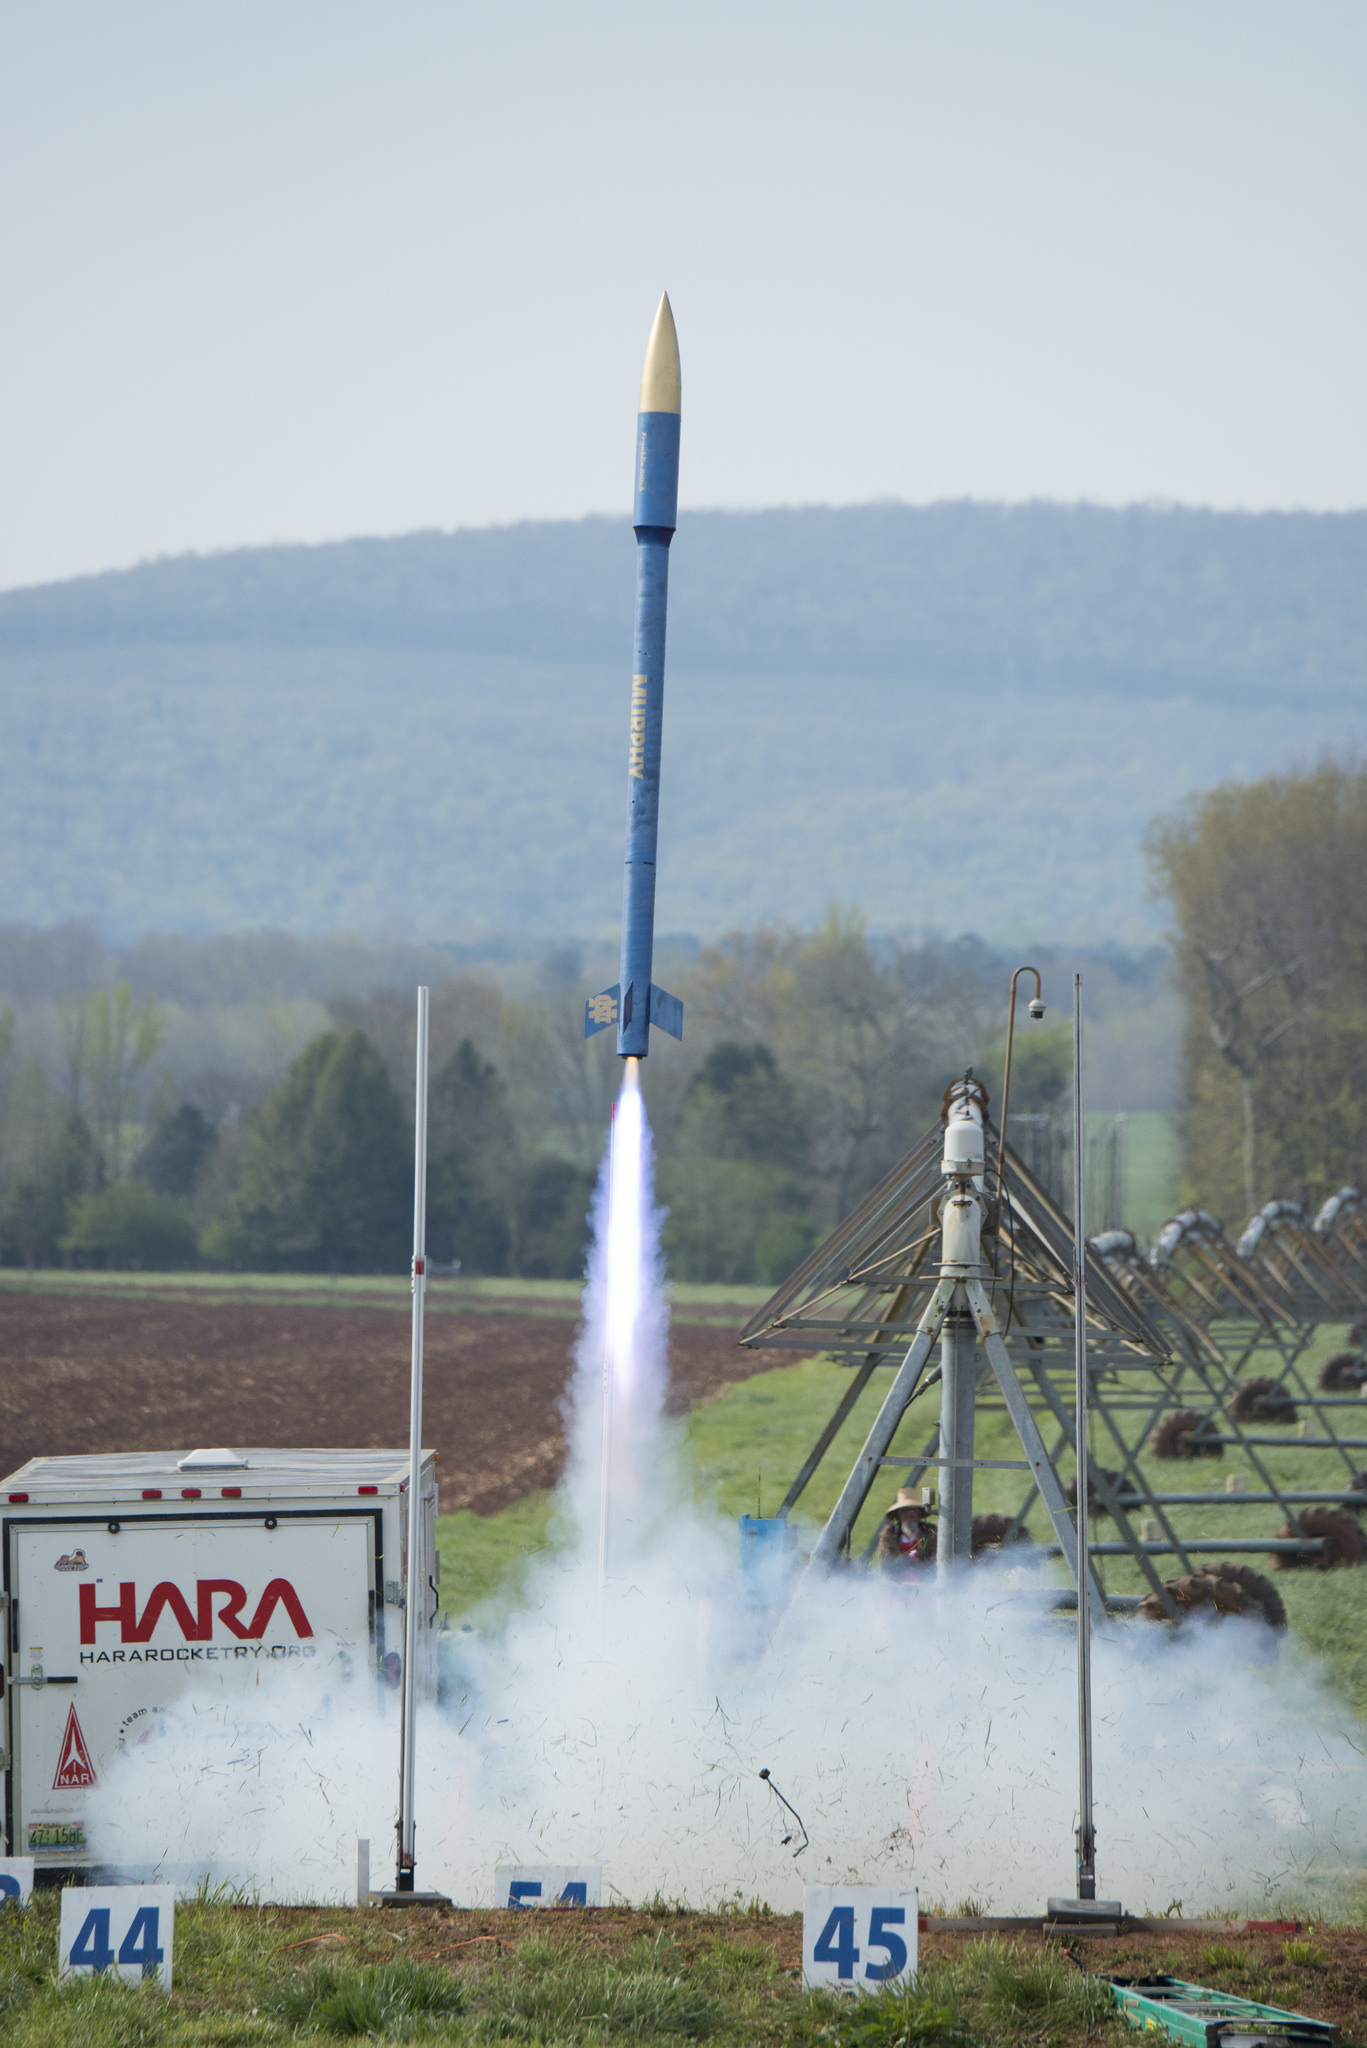 A high-powered amateur rocket takes off